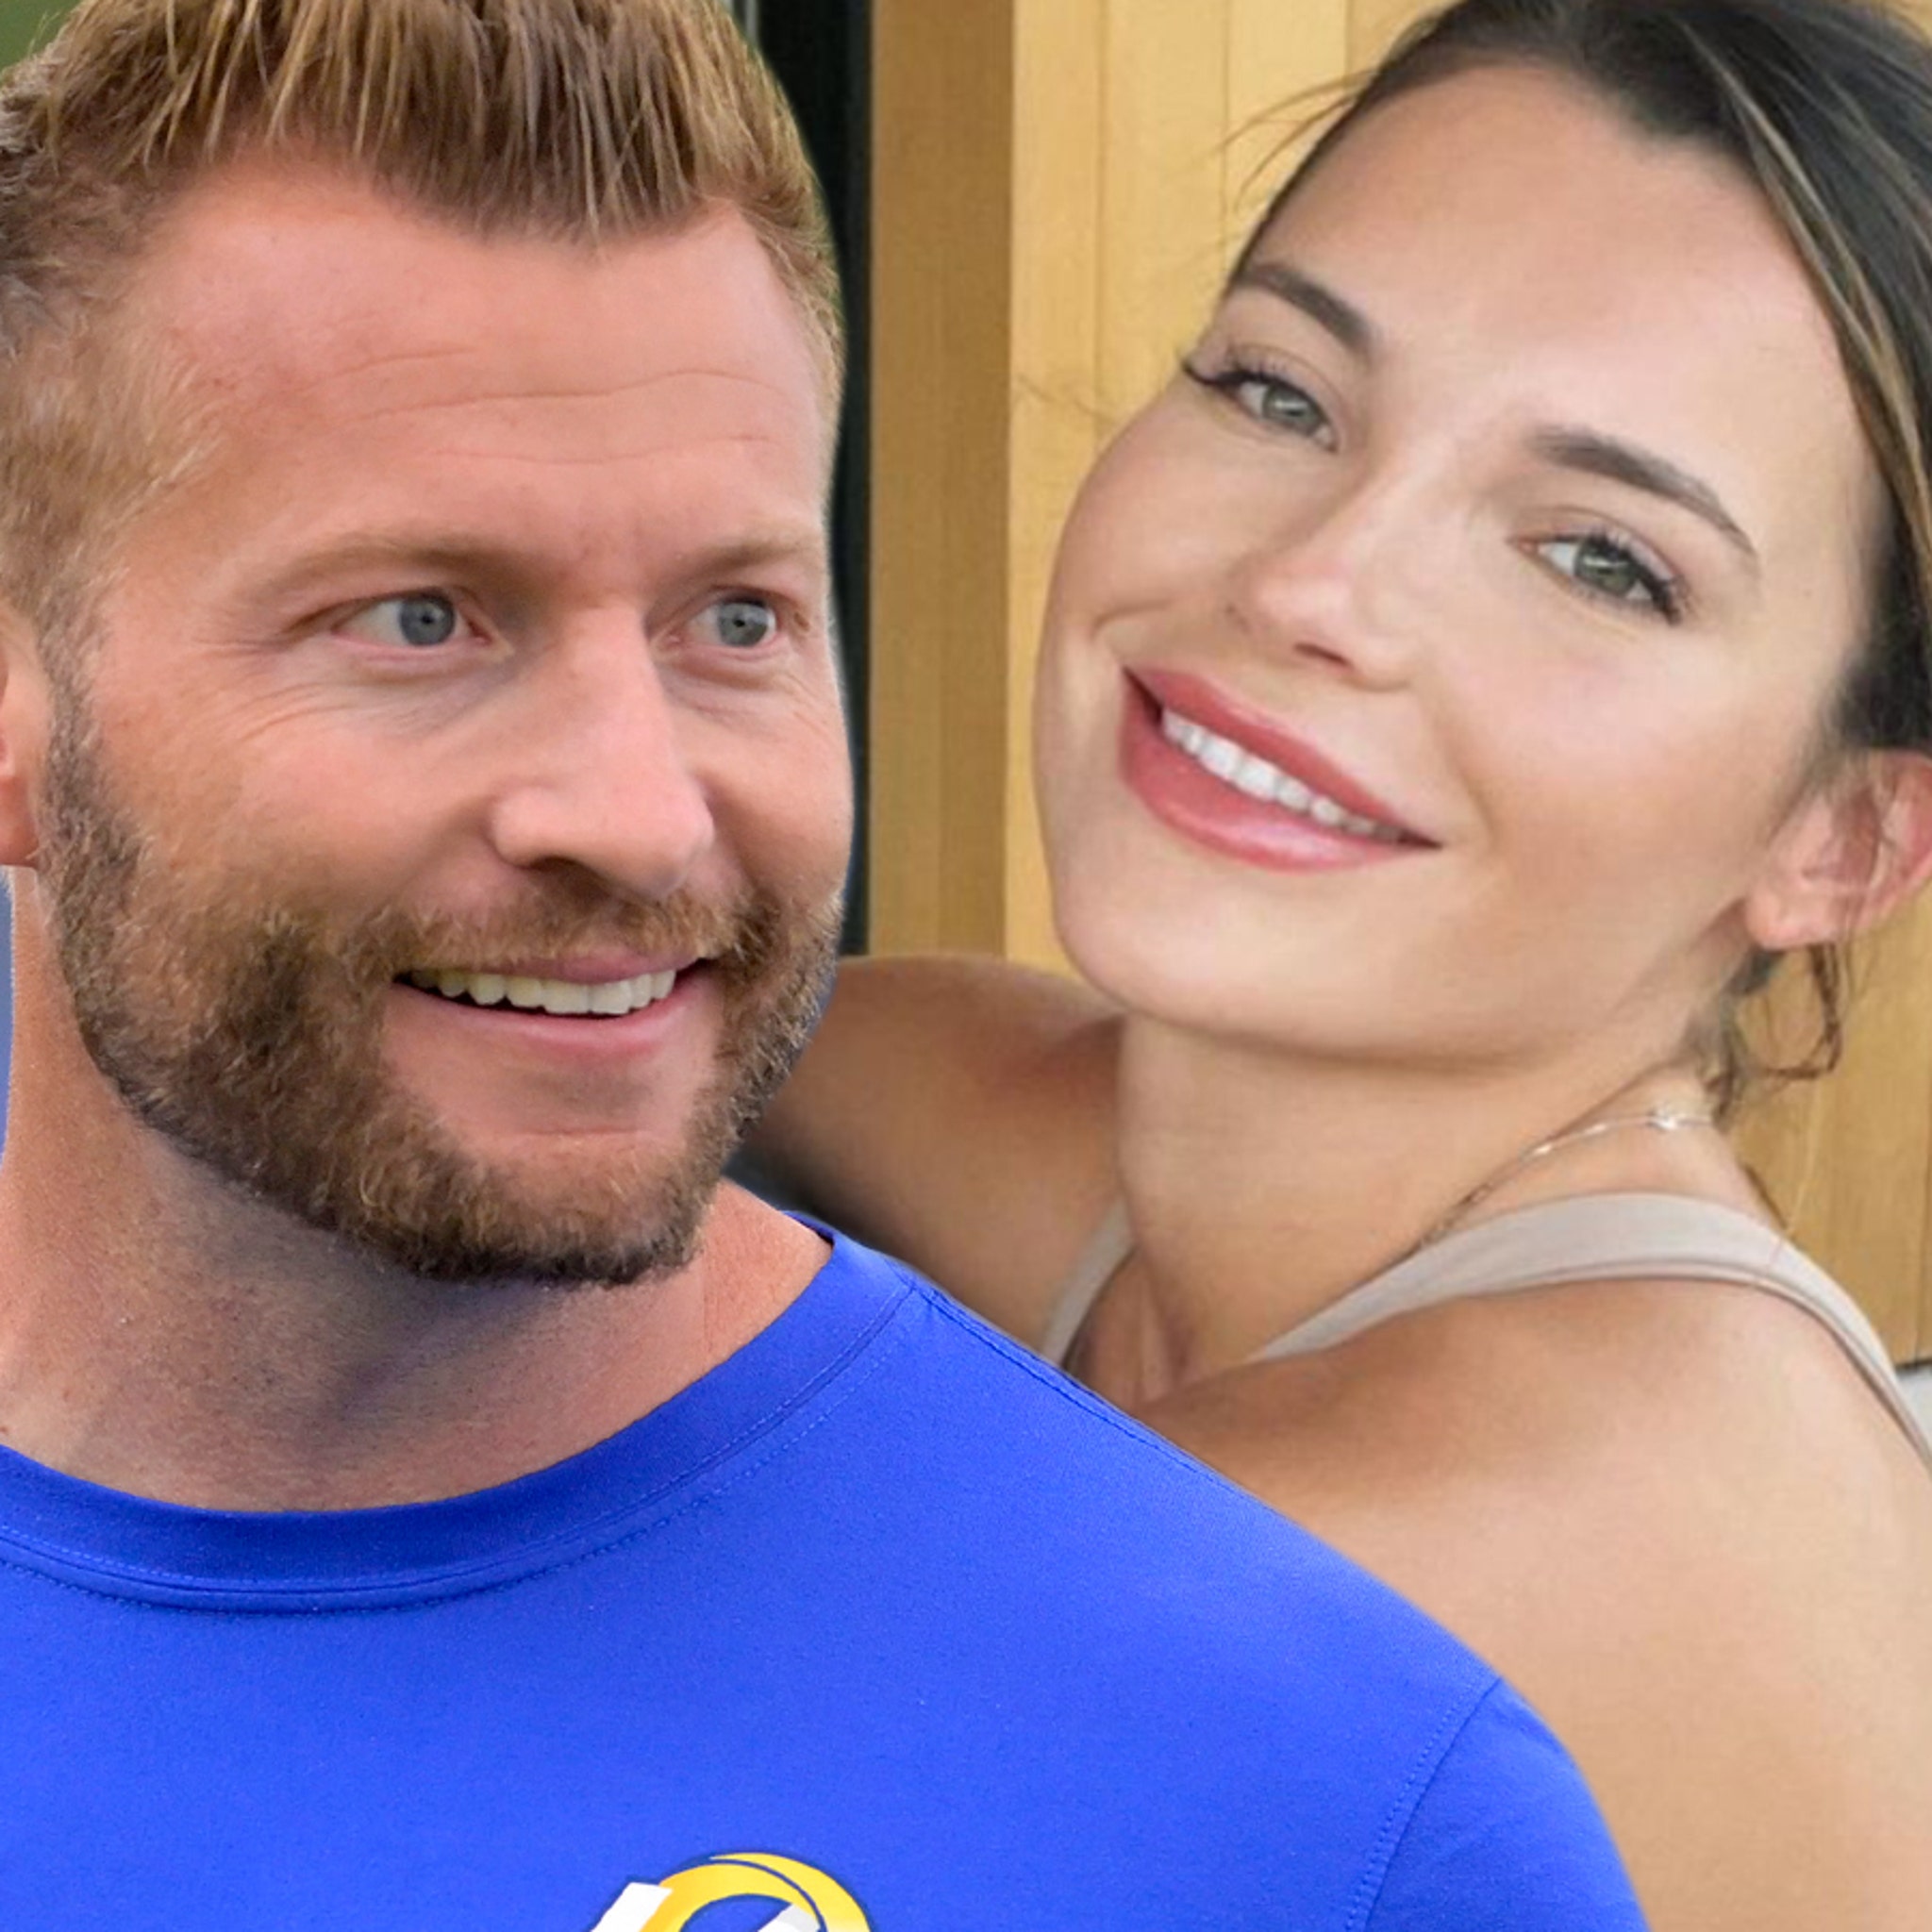 Is Rams' Sean McVay Married? What to Know About Veronika Khomyn